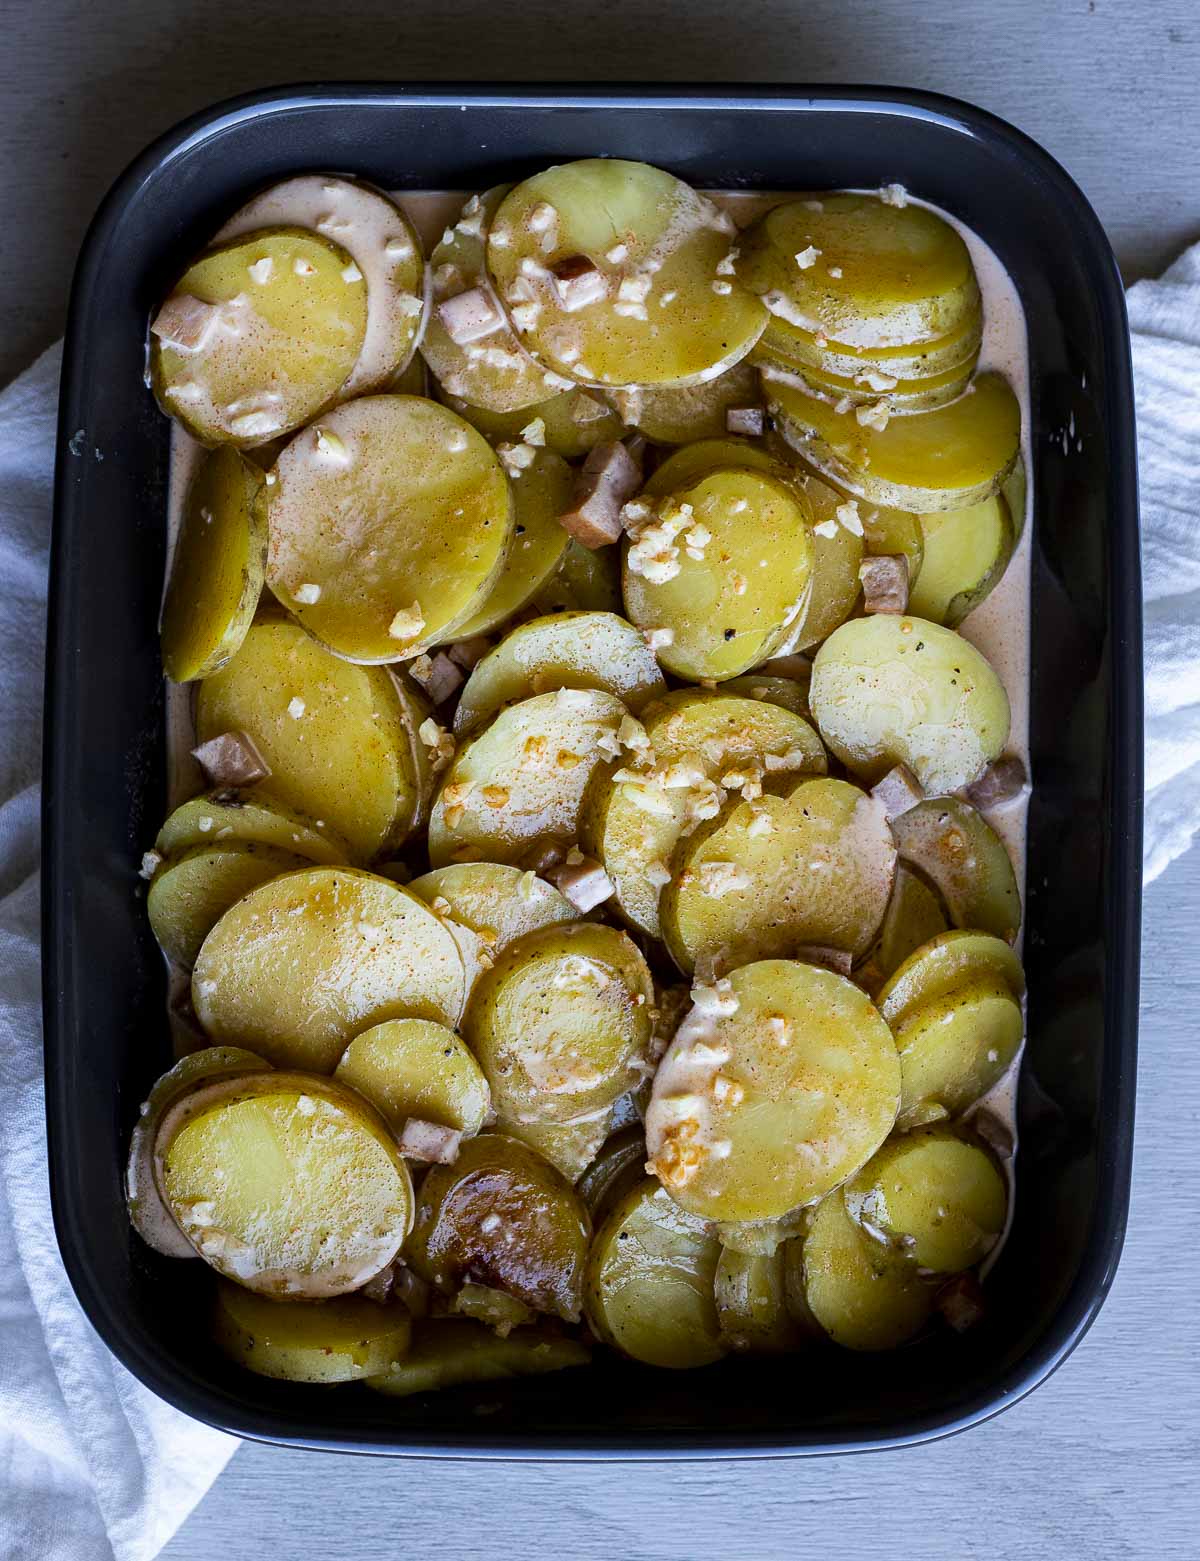 Cooked potato slices arranged in a baking dish.